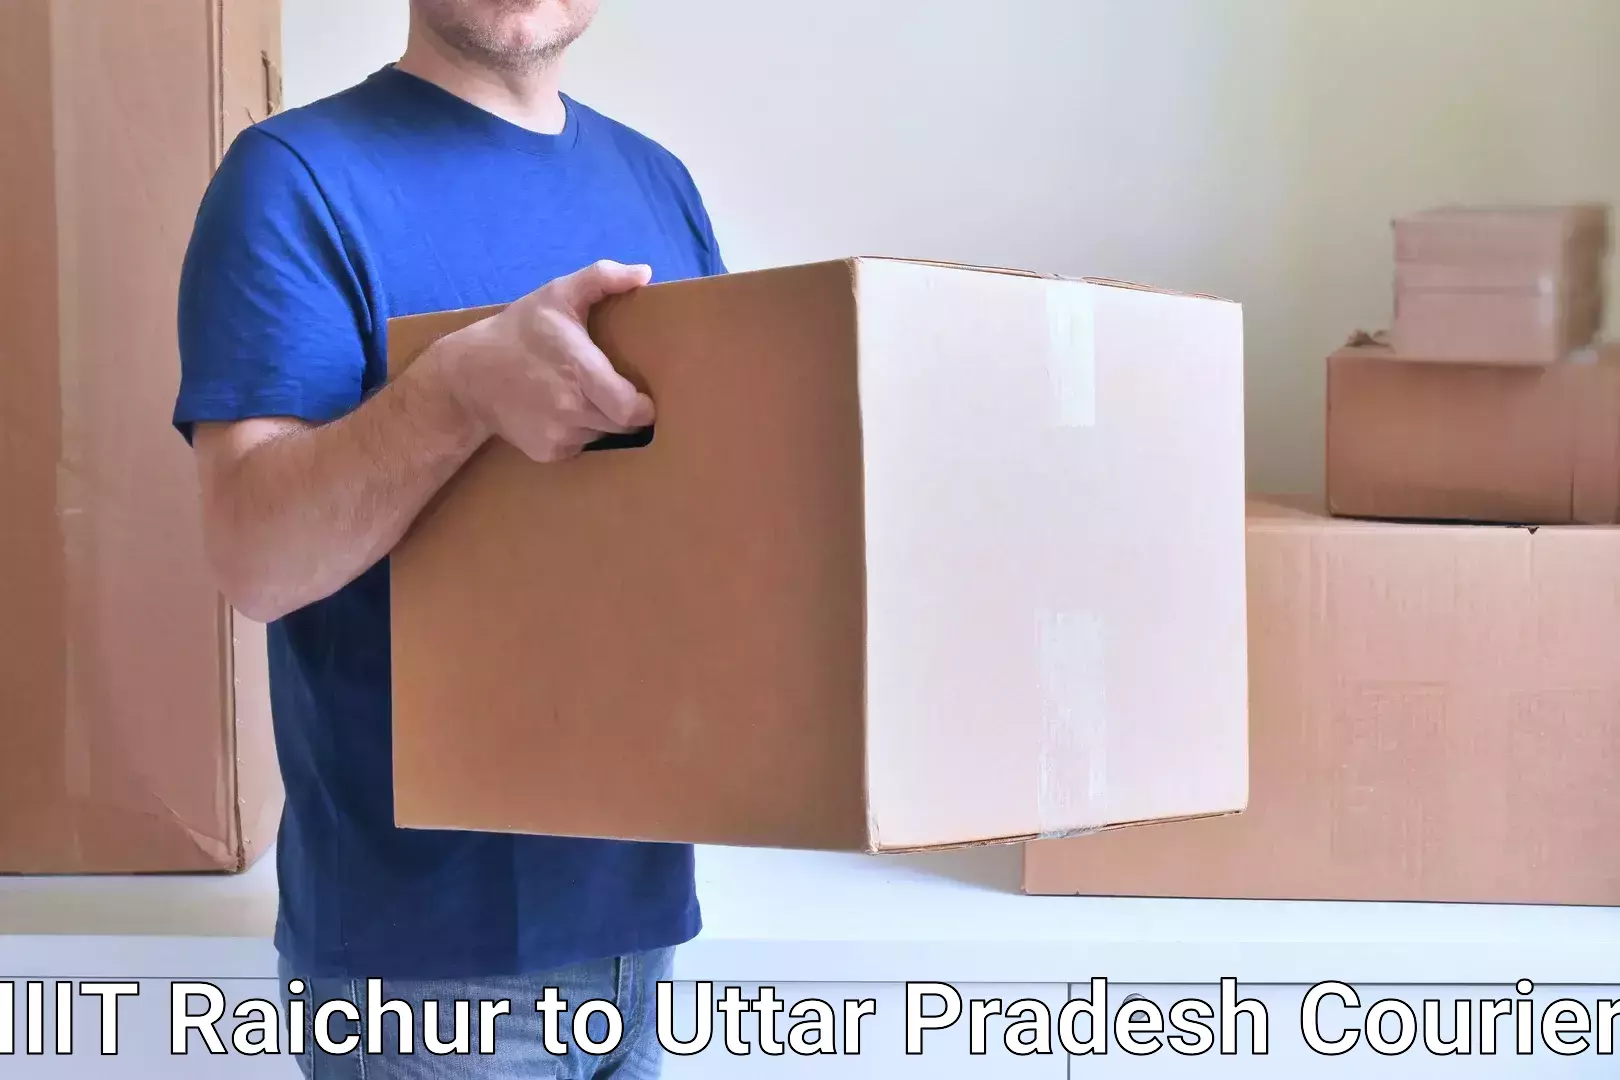 Express package transport in IIIT Raichur to Allahabad